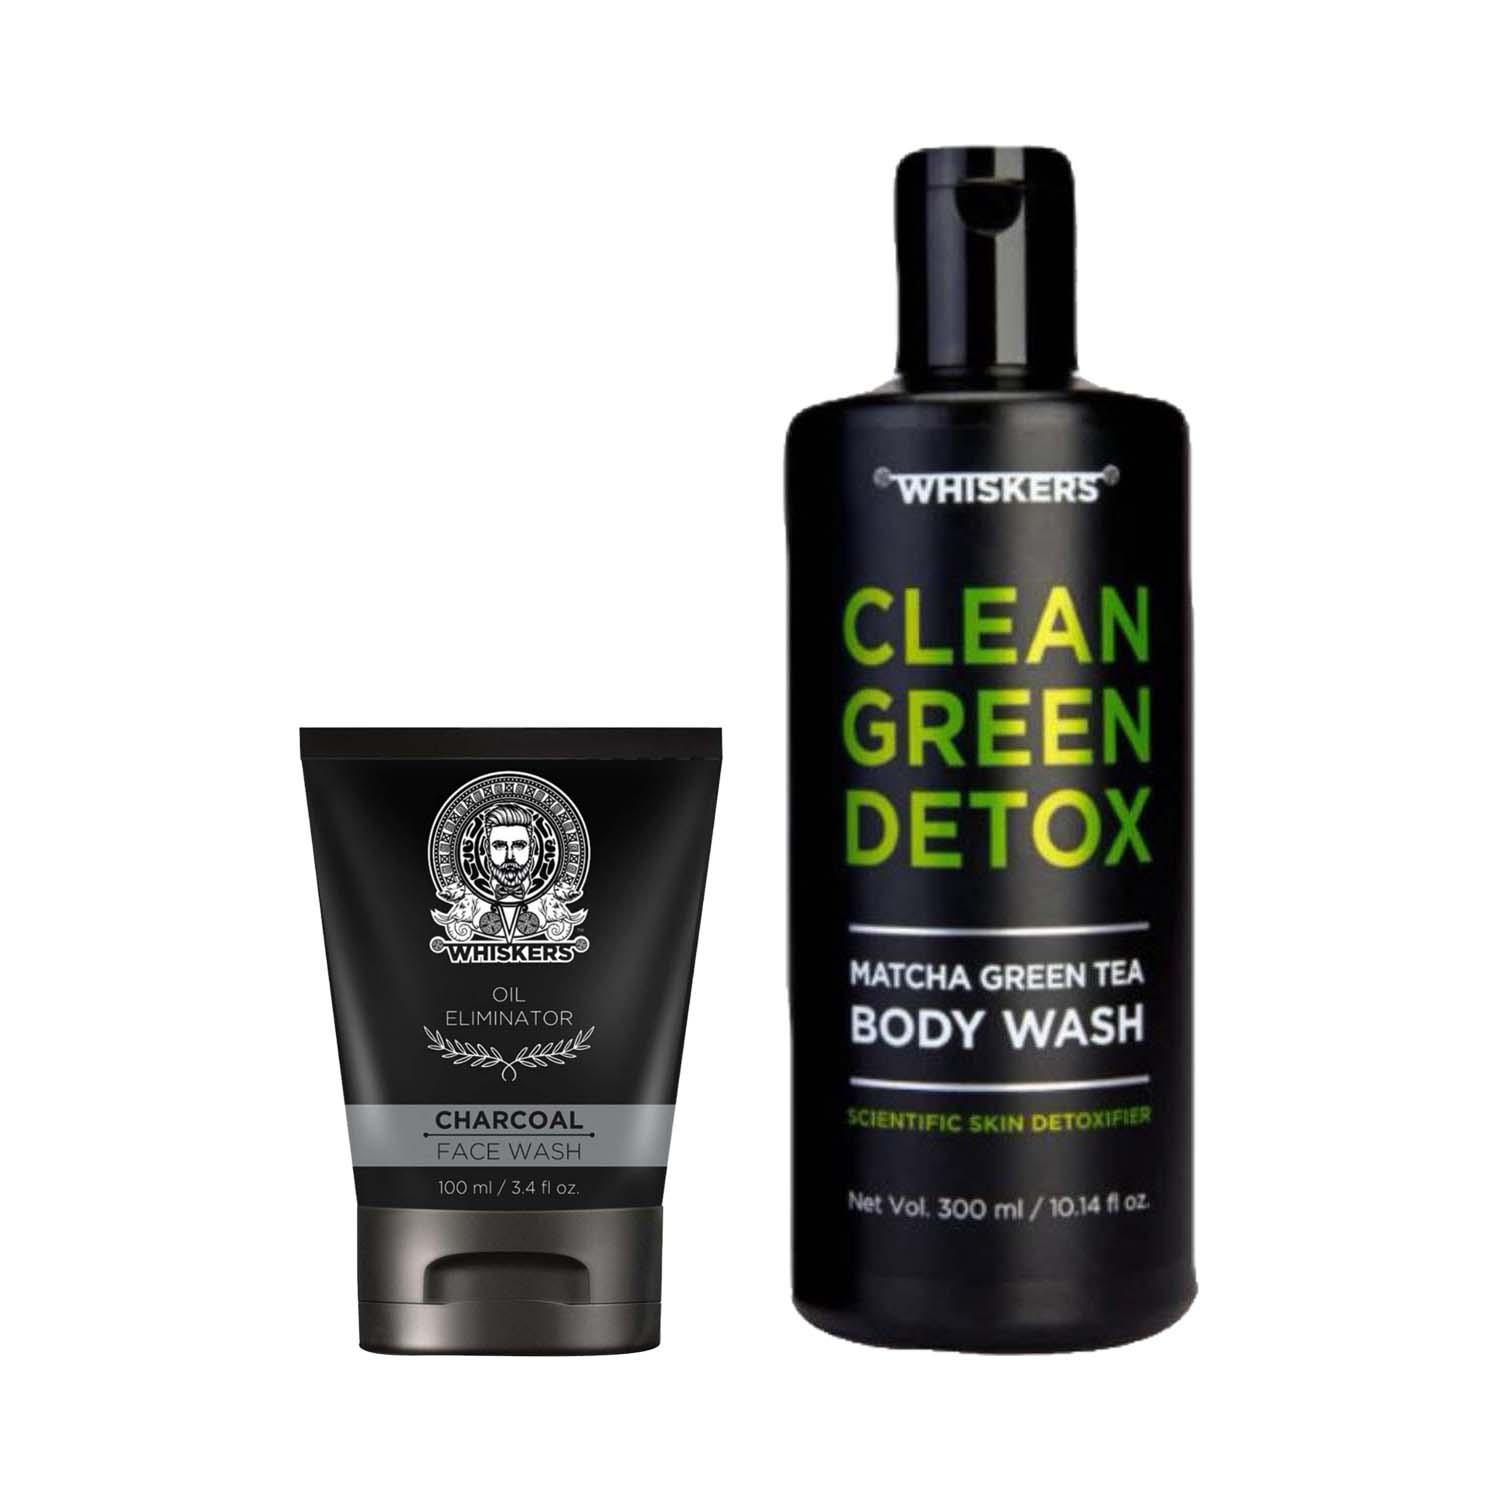 WHISKERS | WHISKERS Matcha Green Tea Body Wash For Men (300 ml) & Charcoal Face Wash For Men (100 ml) Combo